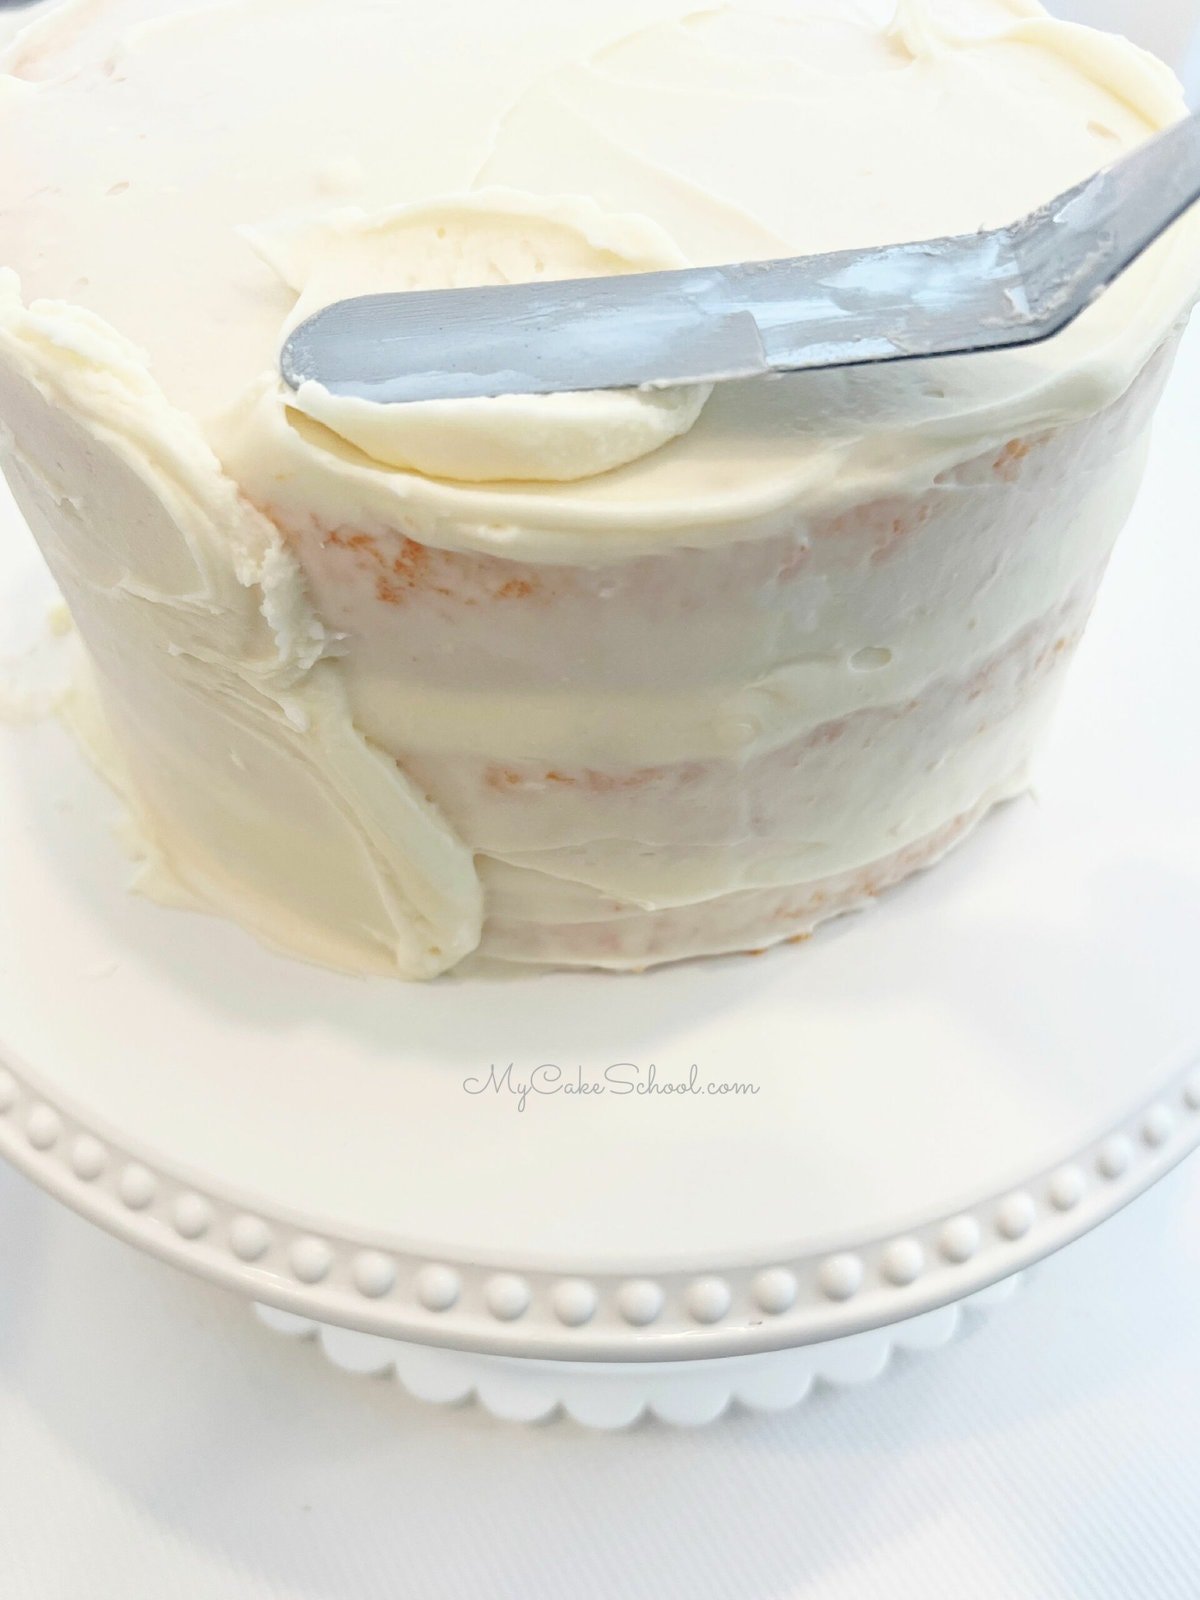 Frosting orange cake with cream cheese frosting